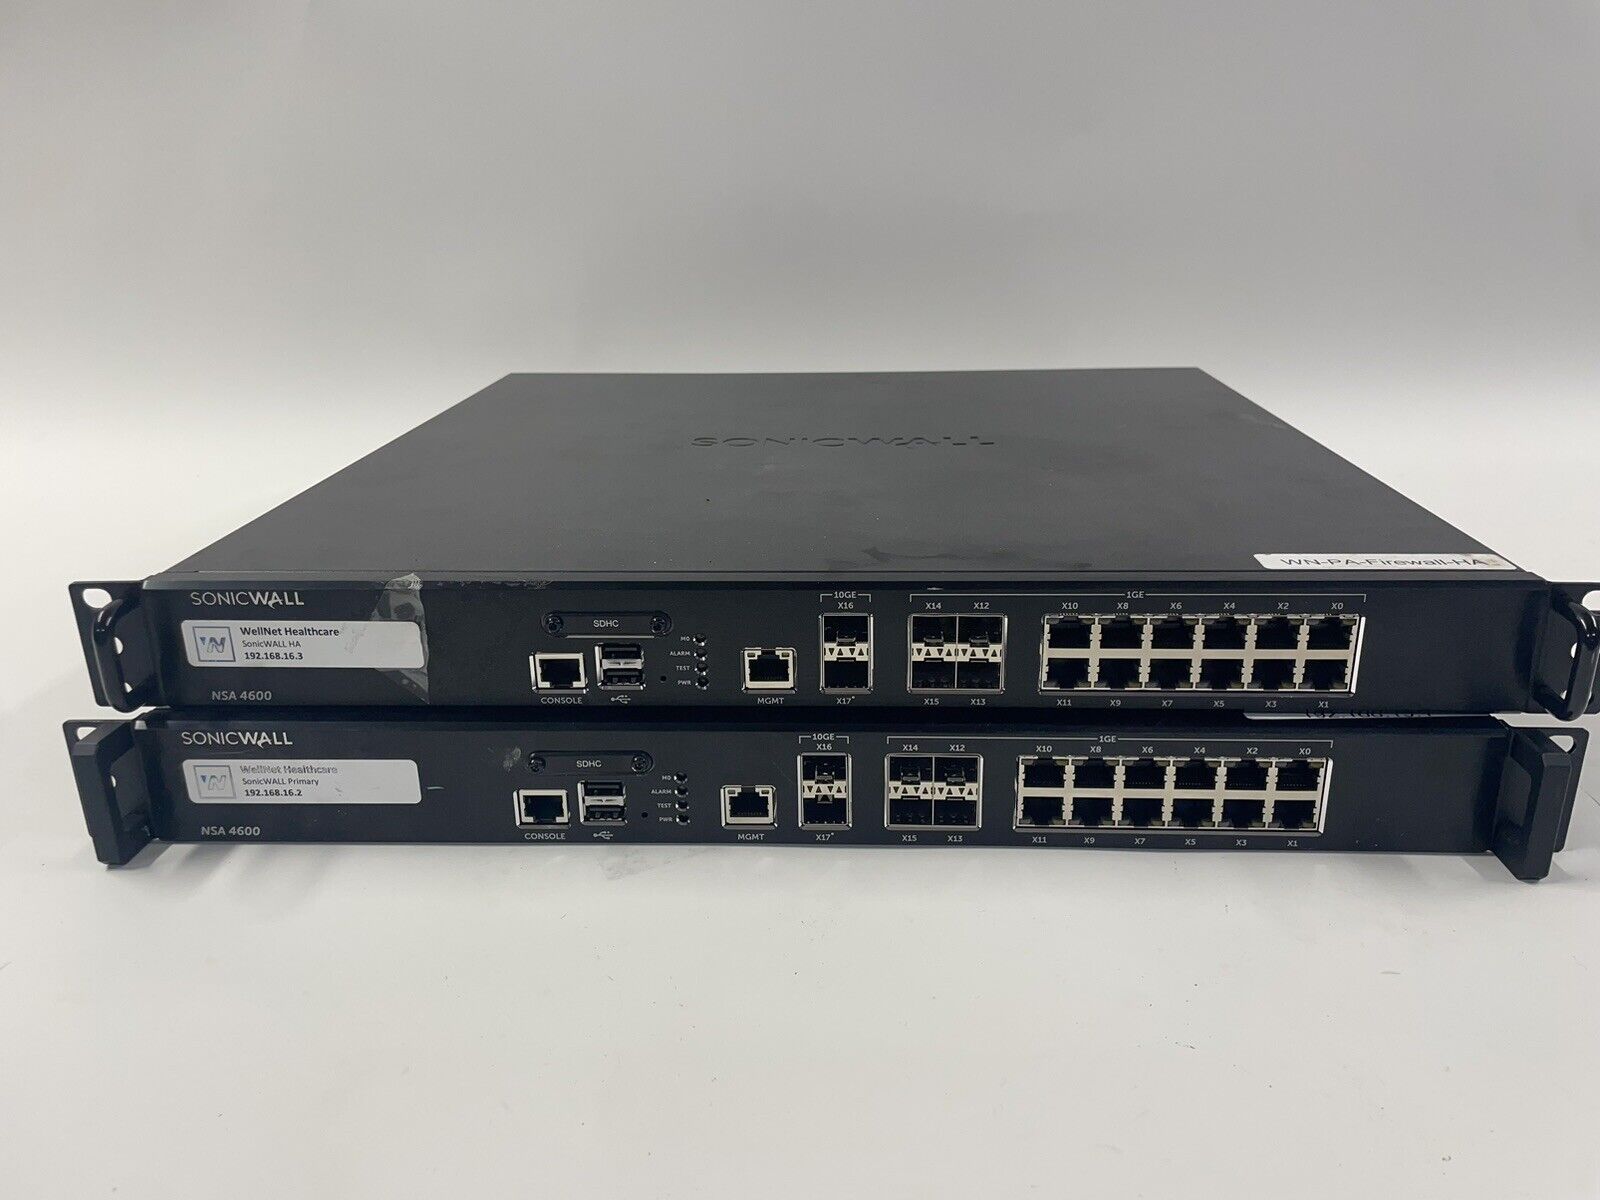 2x Dell SonicWALL NSA 4600 Network Security Appliance Firewall